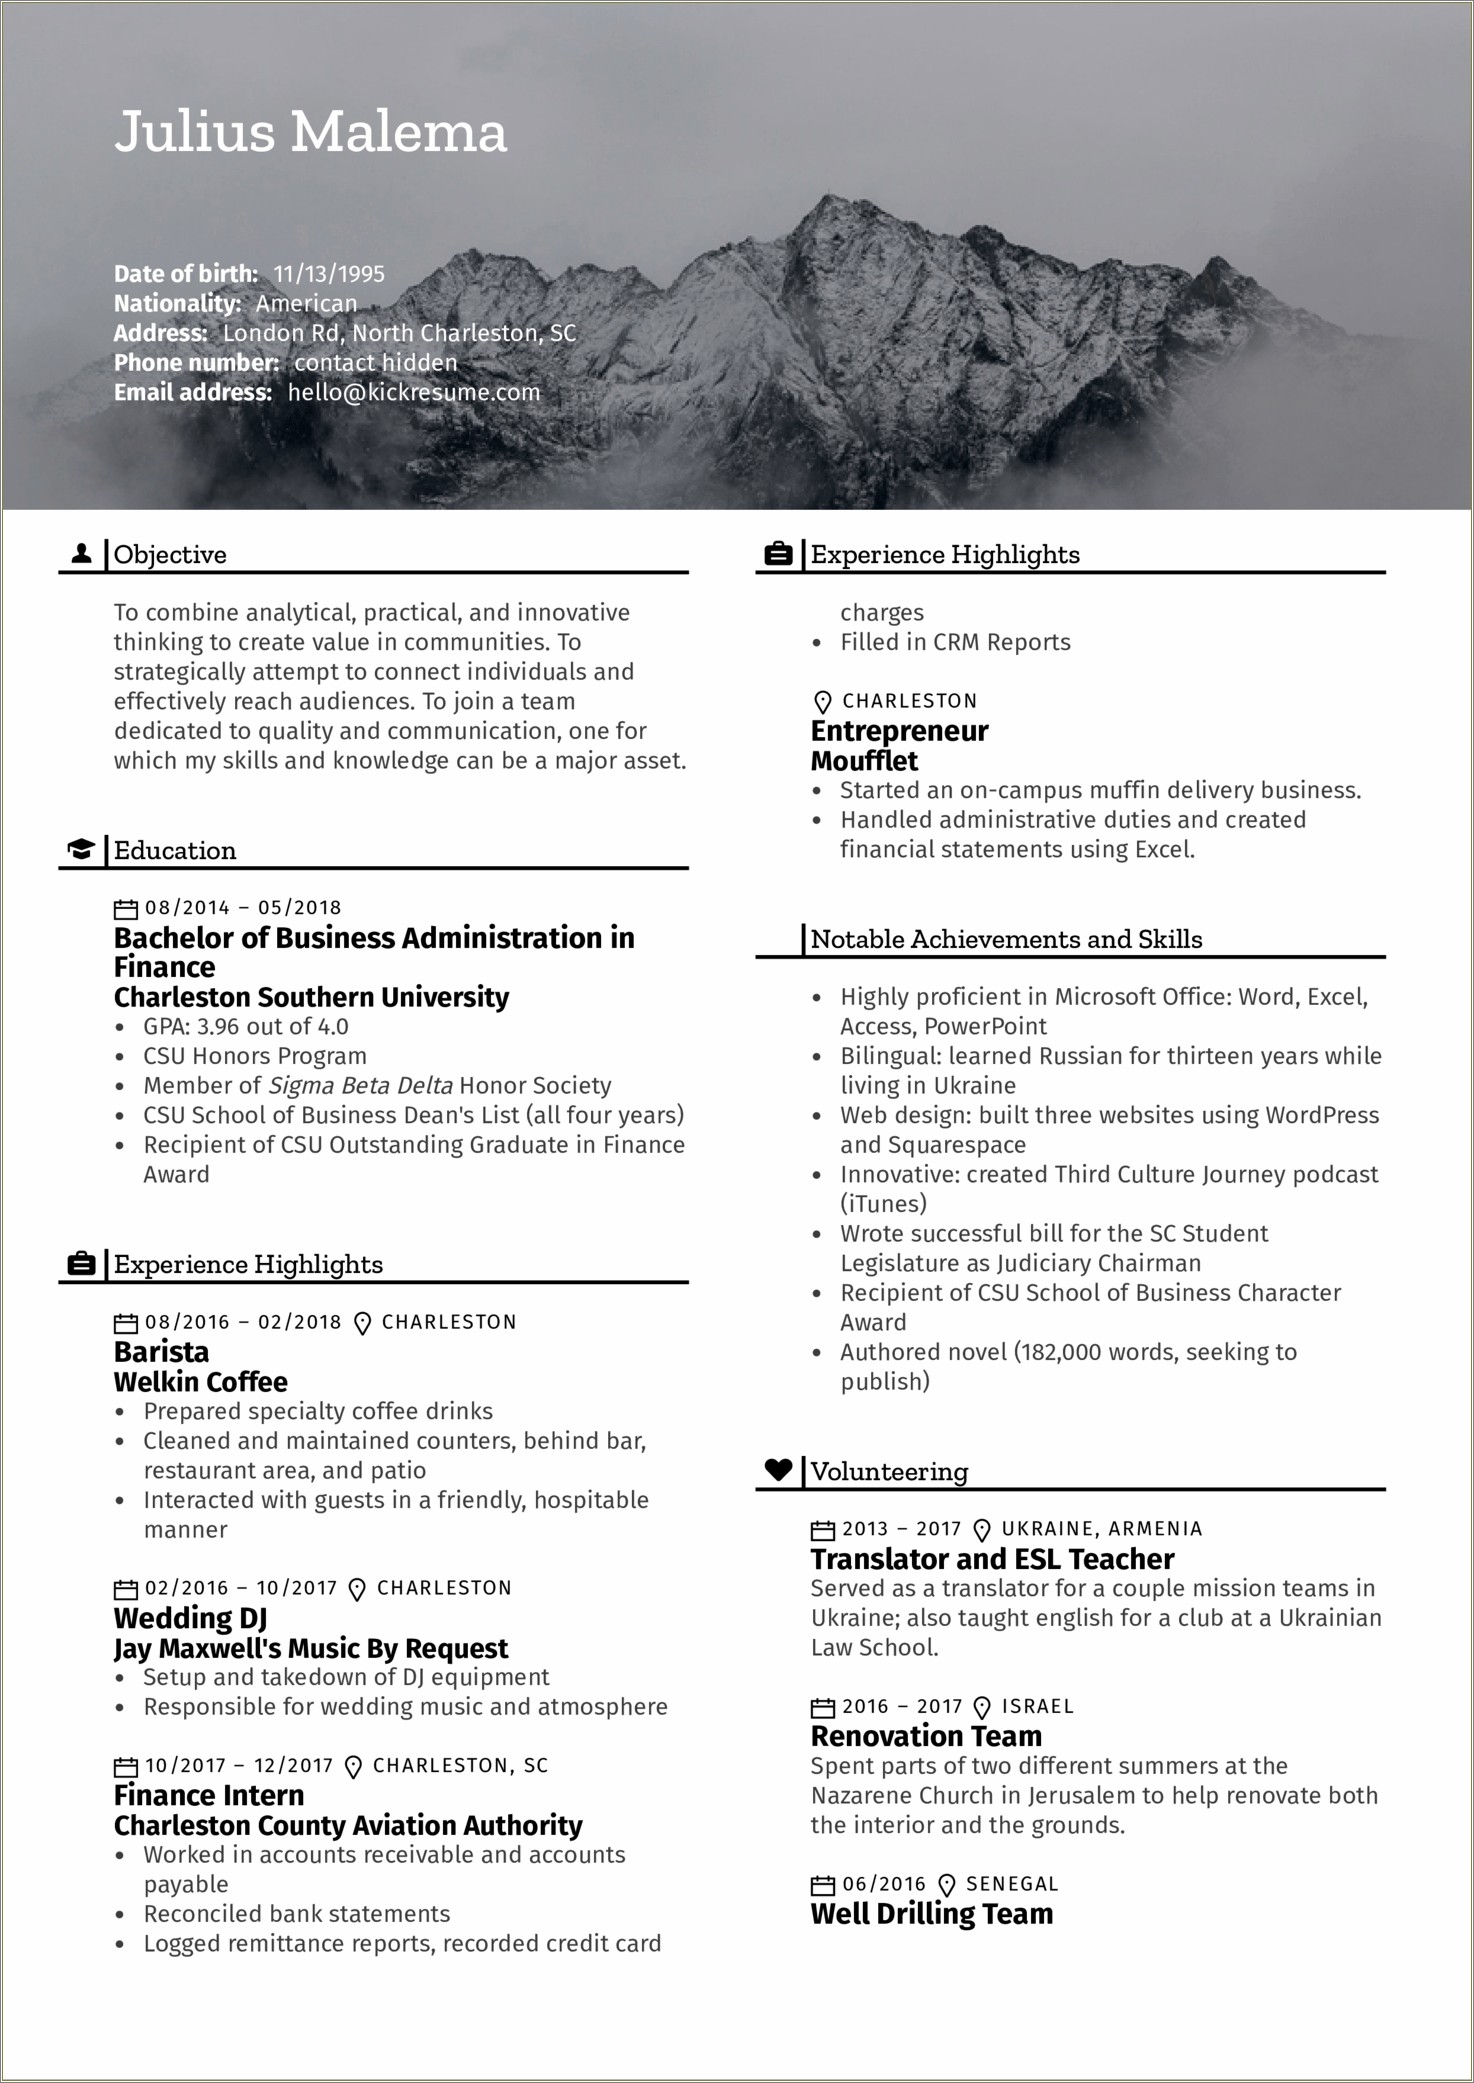 Fresh Graduate Resume With Ojt Experience